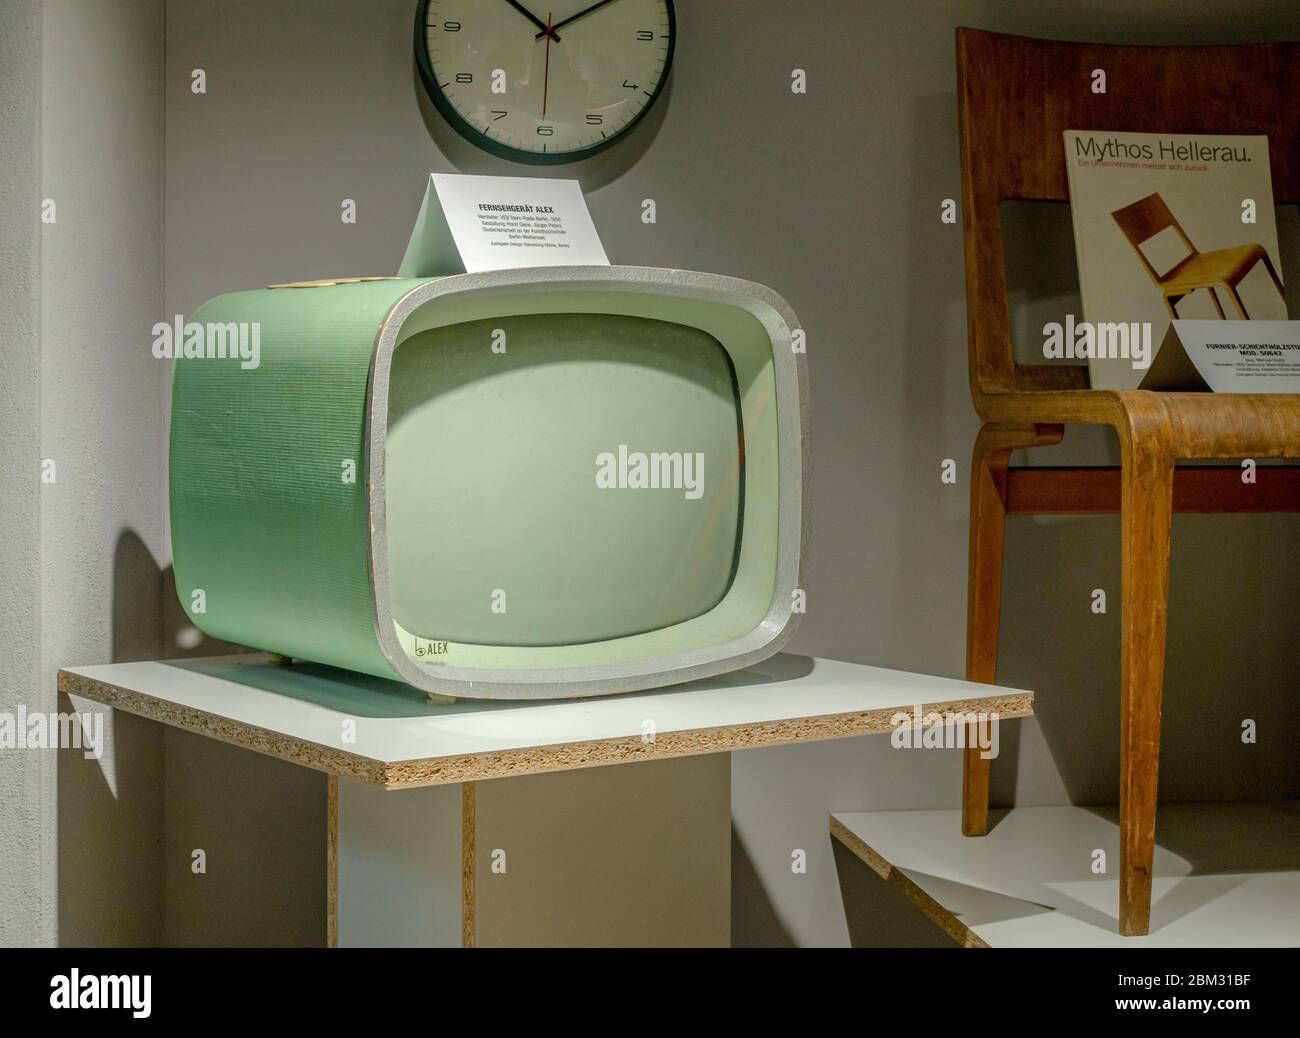 East German Retro TV on display at the DDR Museum of Dresden, Saxony, Germany Stock Photo